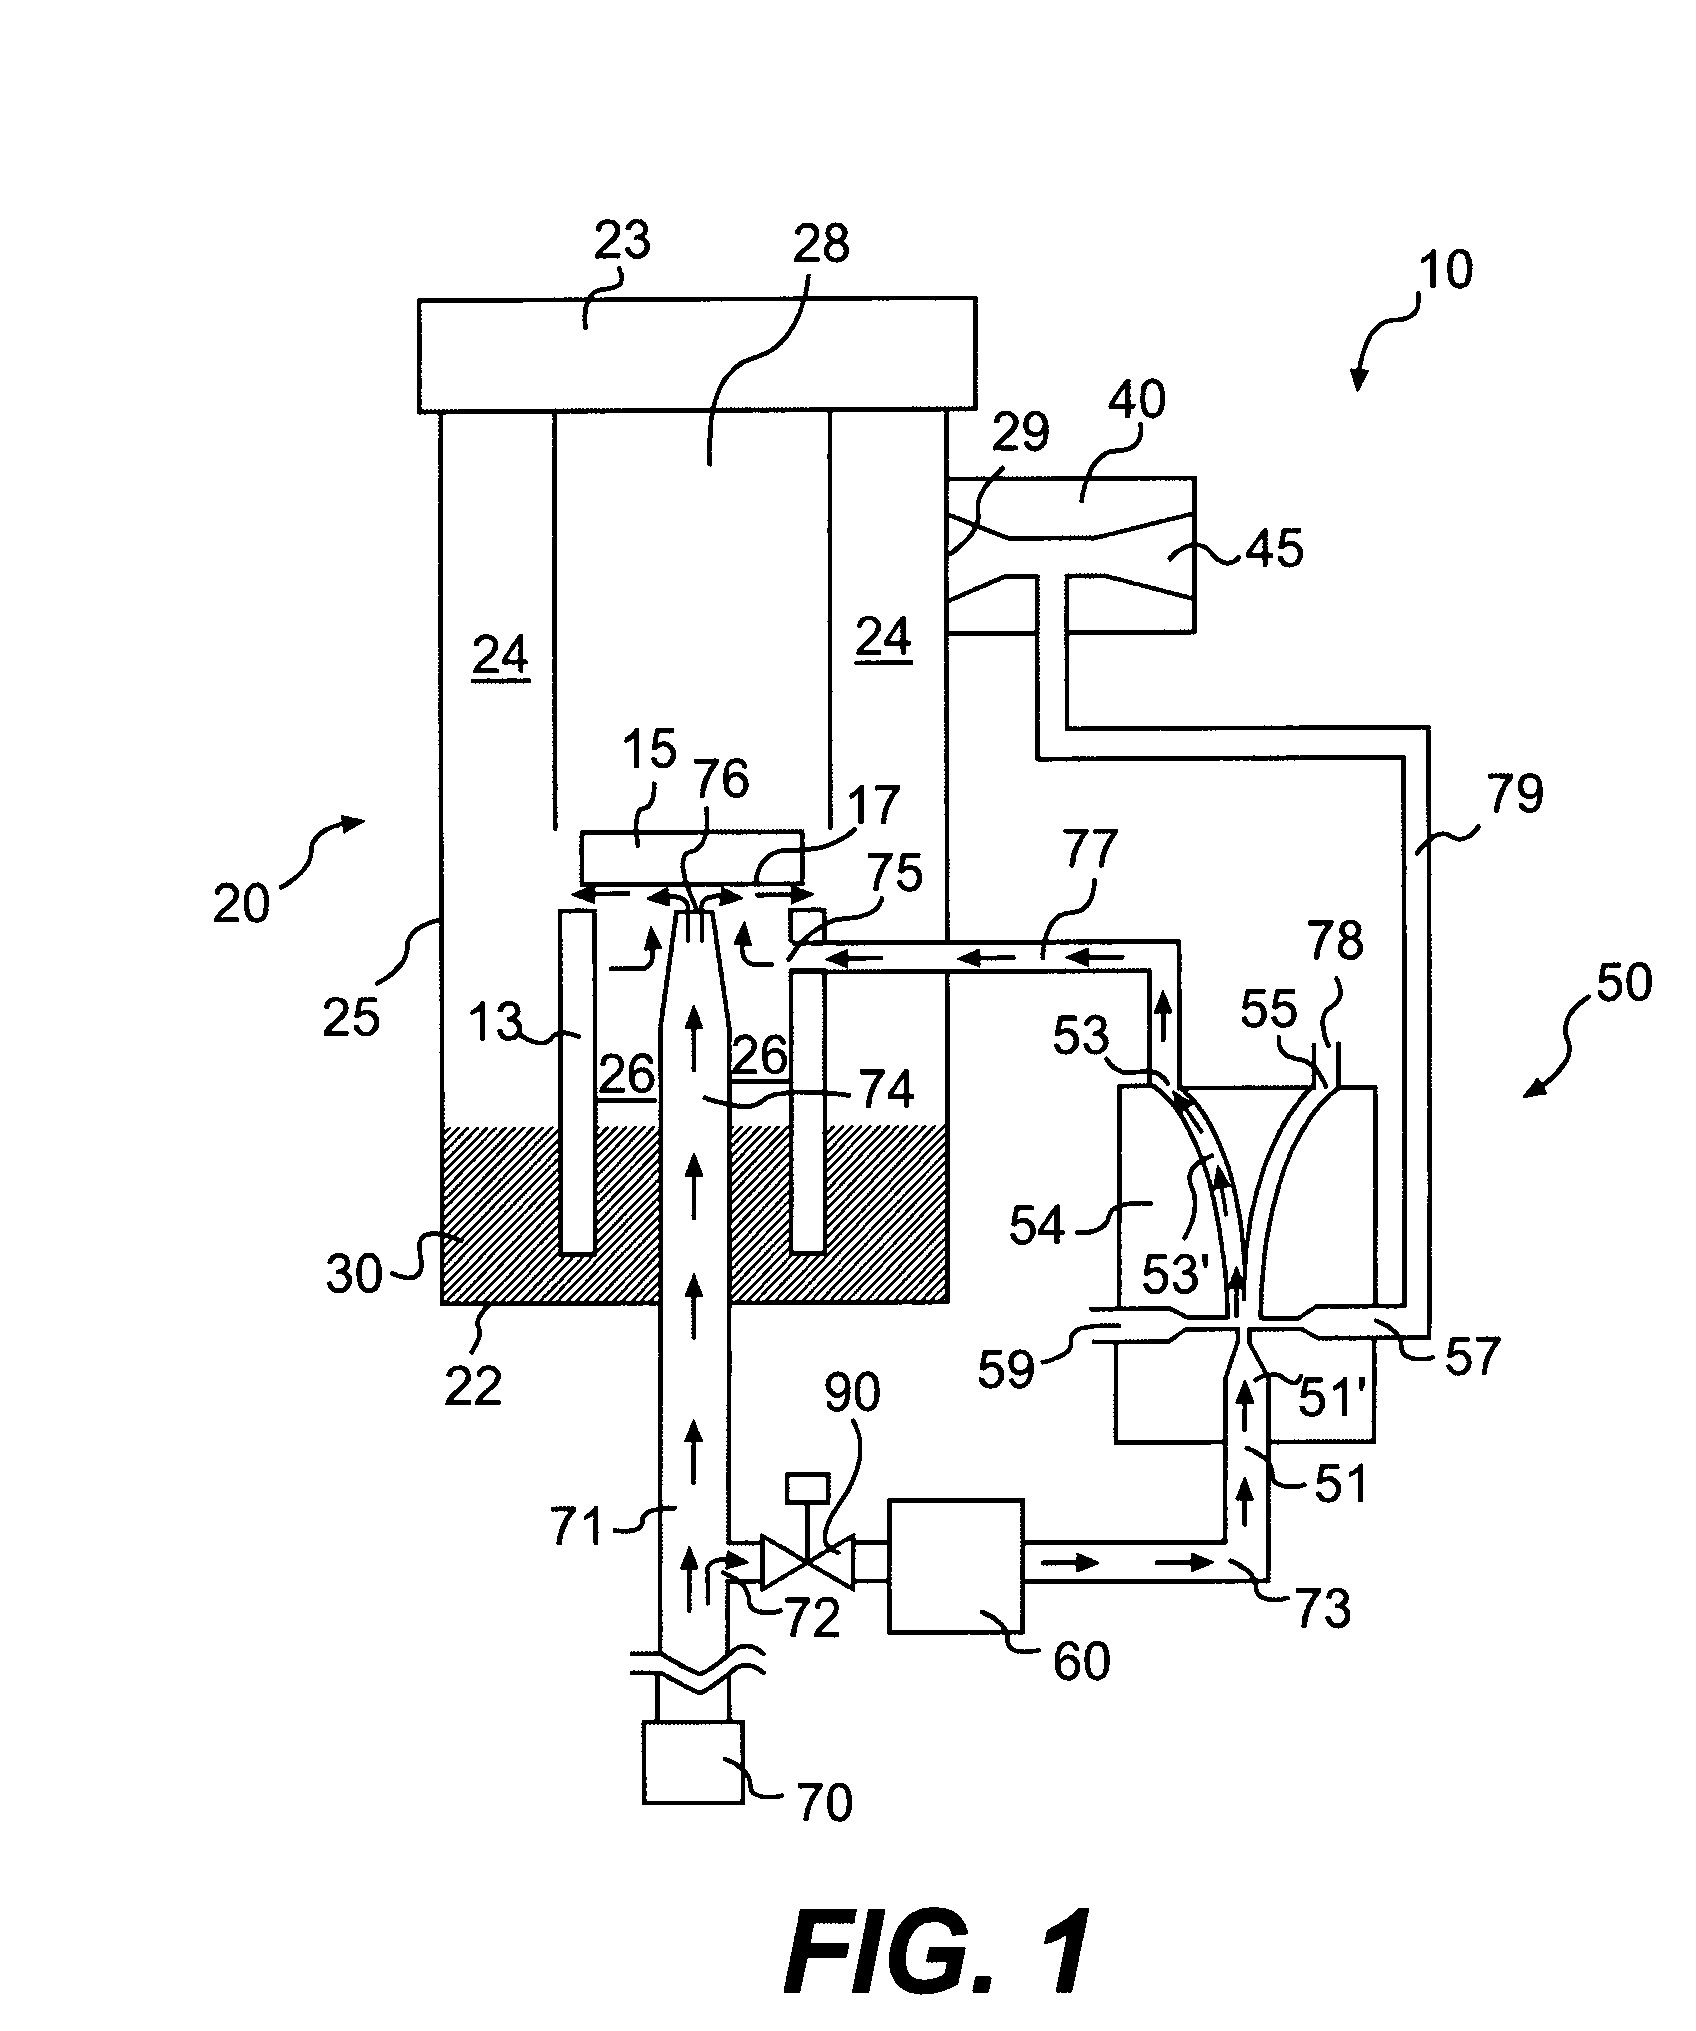 Nebulizer with pressure-based fluidic control and related methods